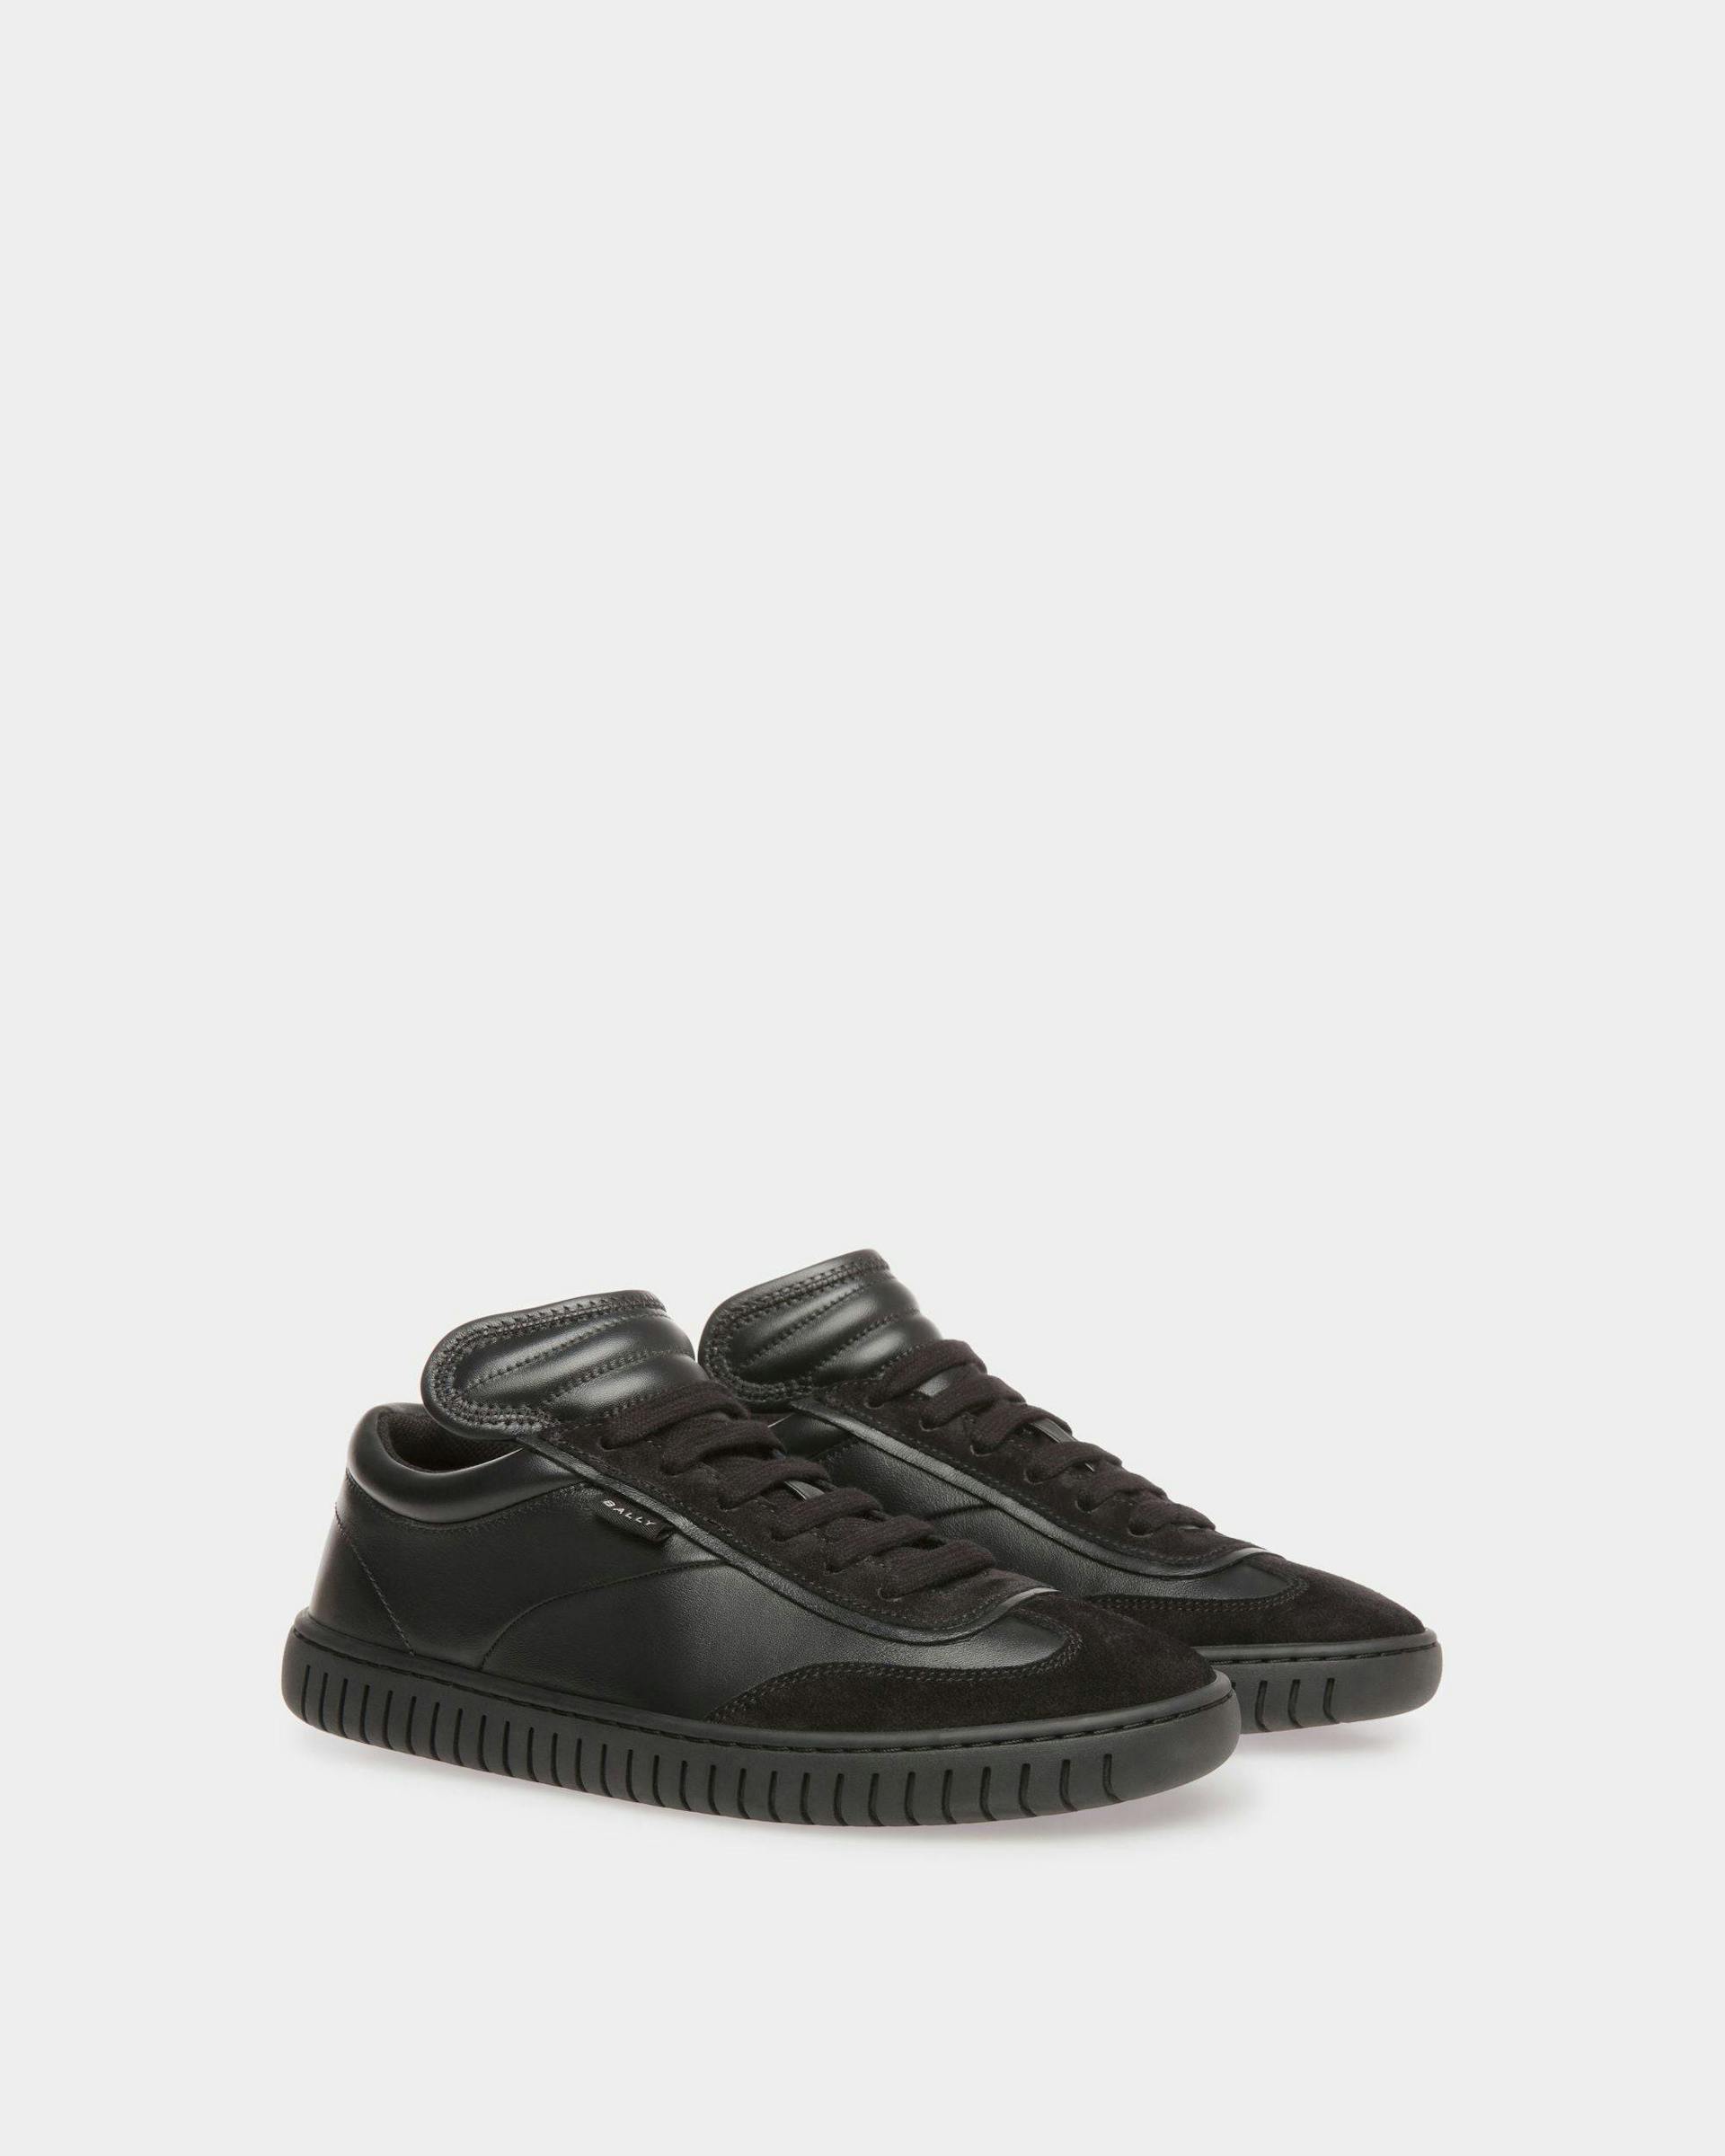 Women's Player Sneakers In Black Leather | Bally | Still Life 3/4 Front